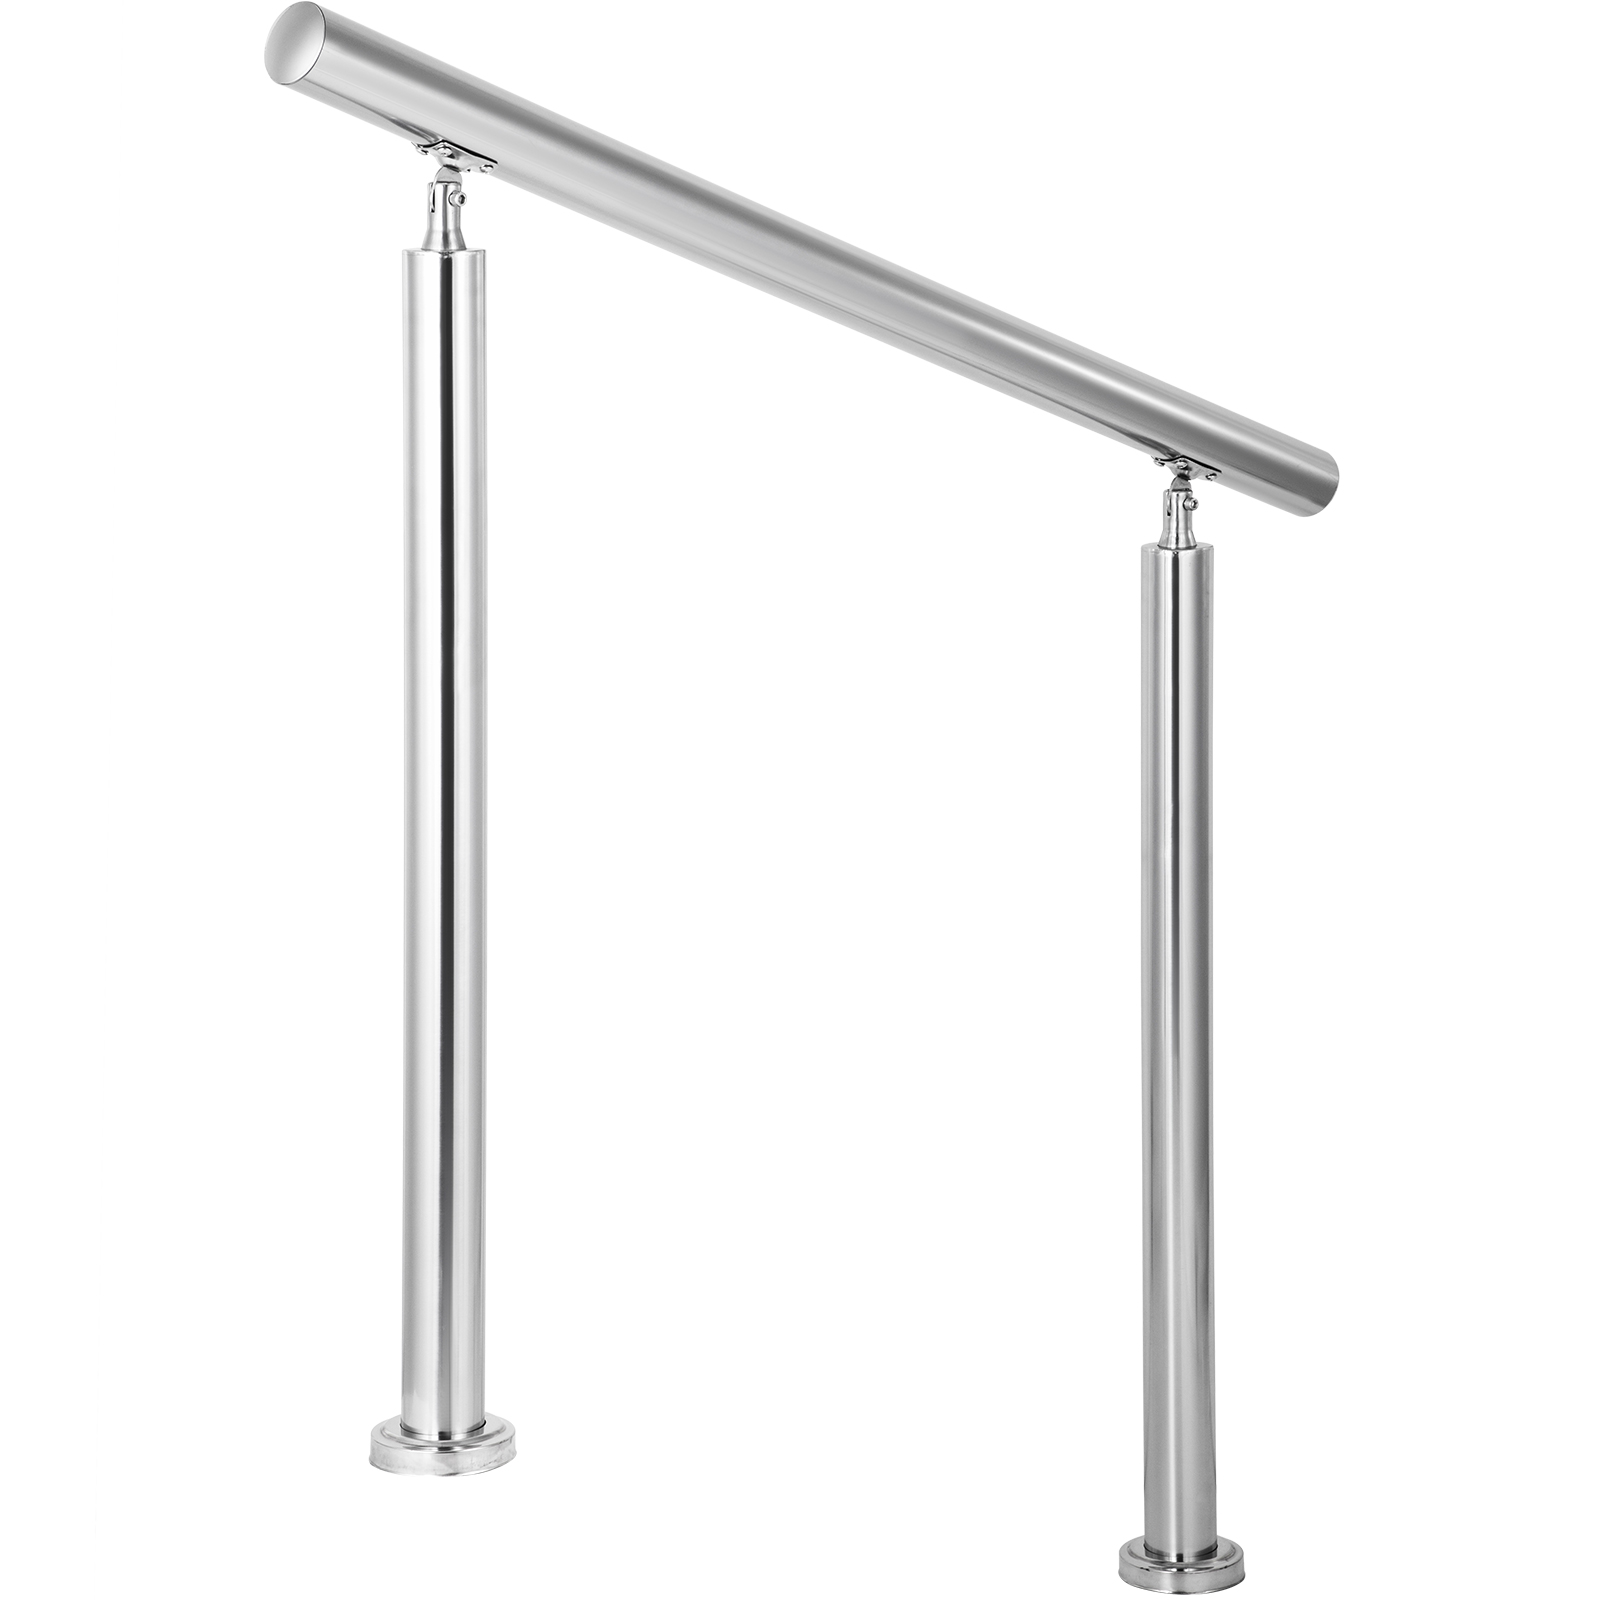 VEVOR Handrail for Outdoor Steps Stainless Steel Handrail Fits 1 to 5 ...